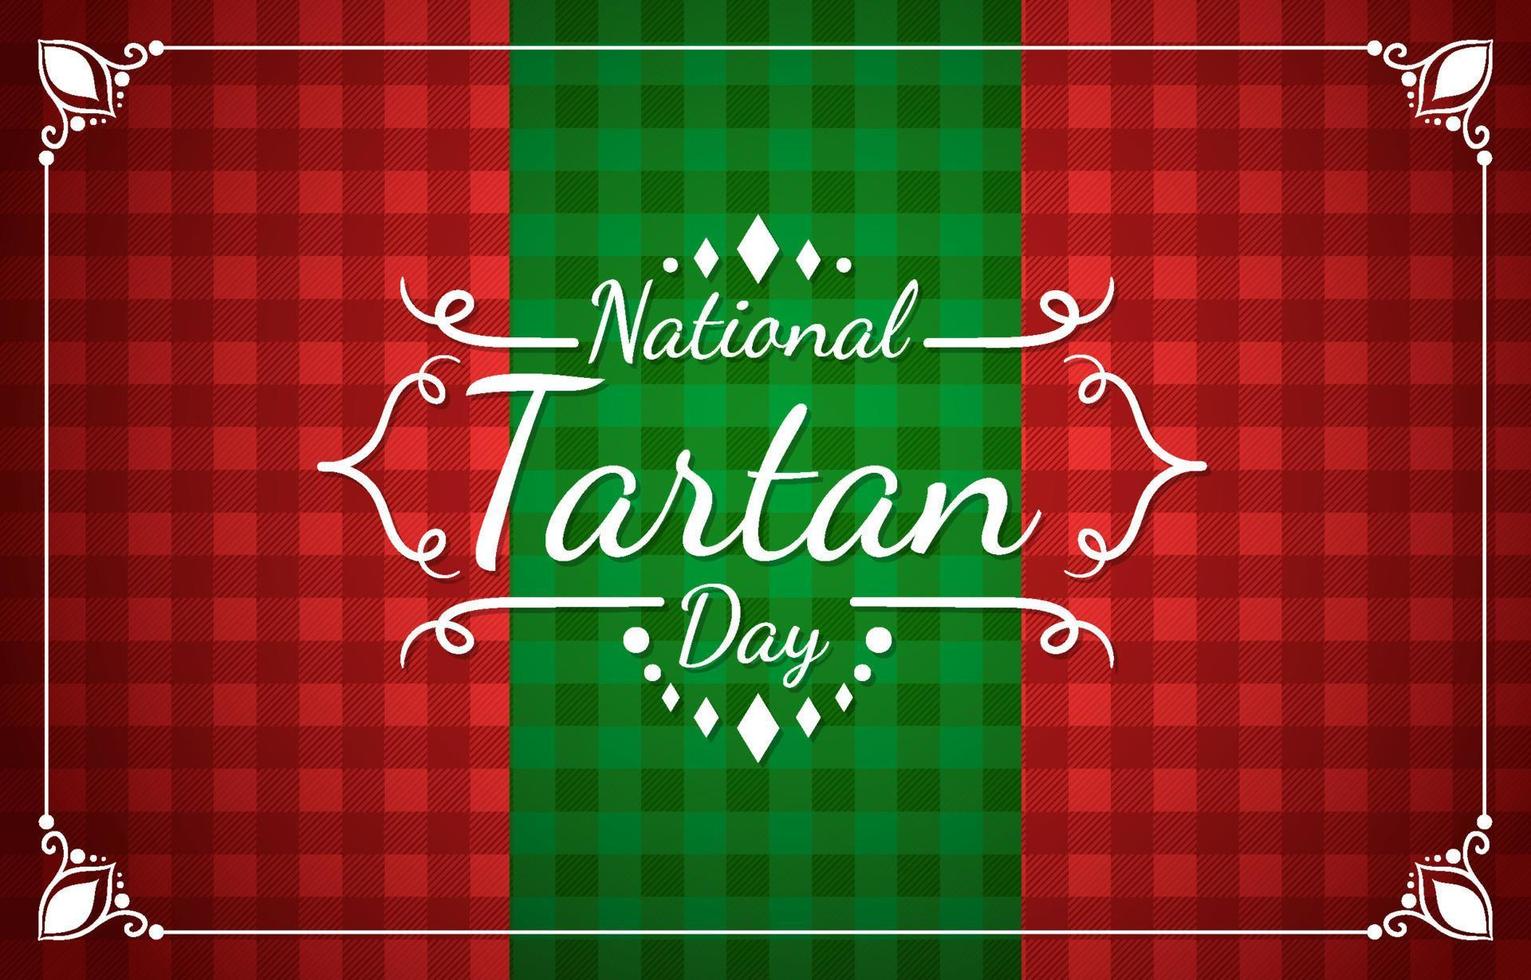 Happy National Tartan Day Background vector